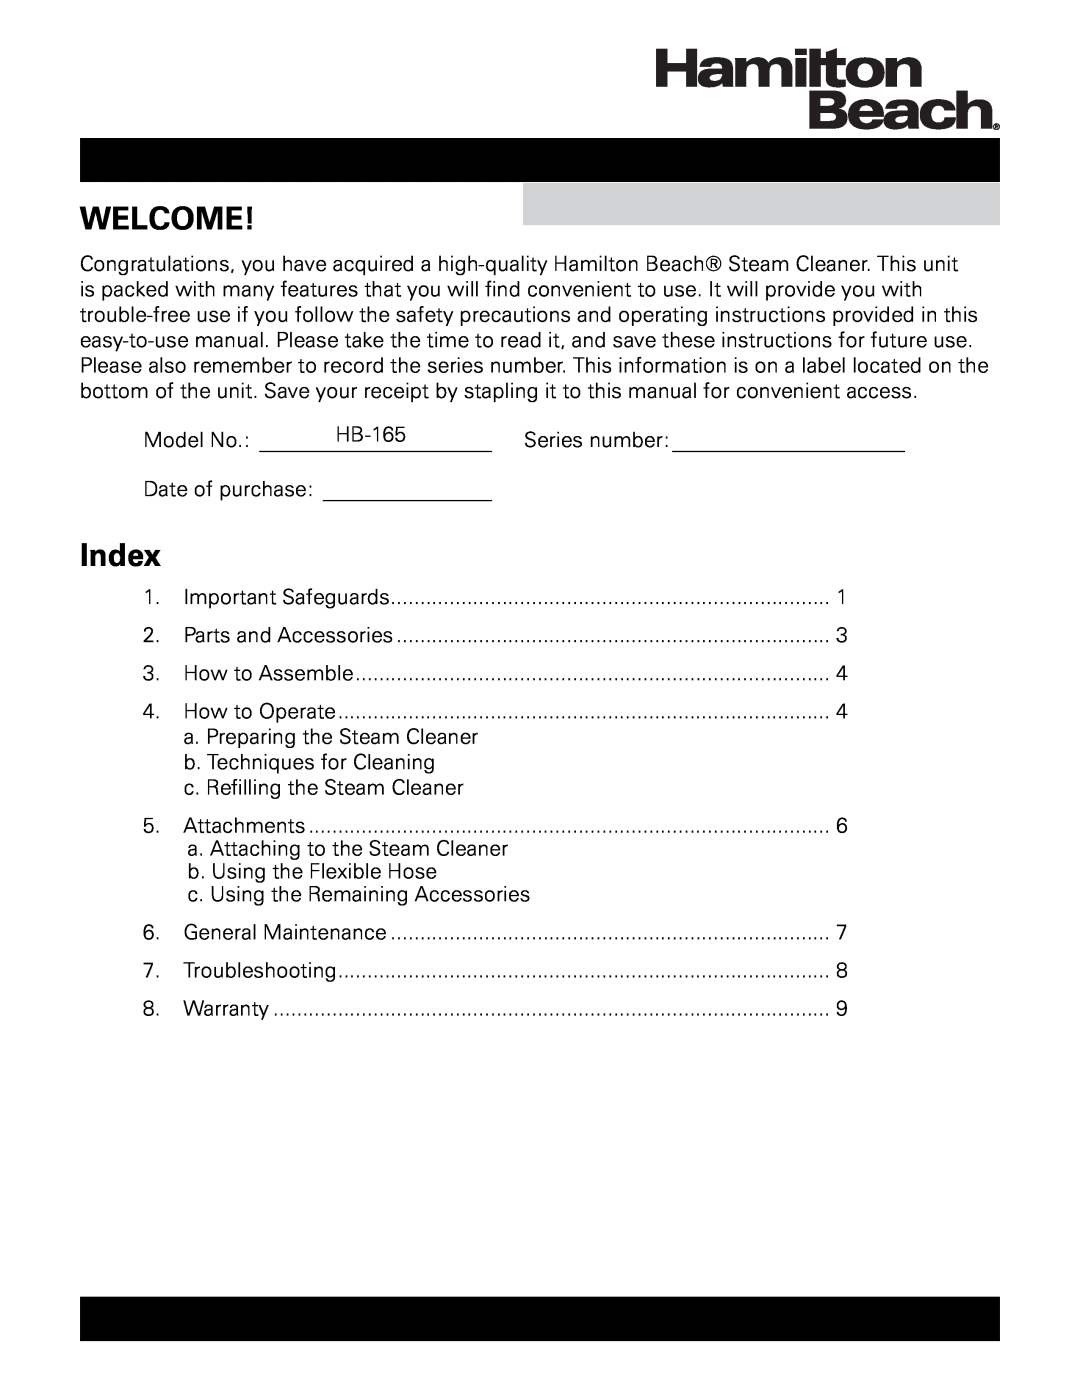 Hamilton Beach HB-165 owner manual Welcome, Index 